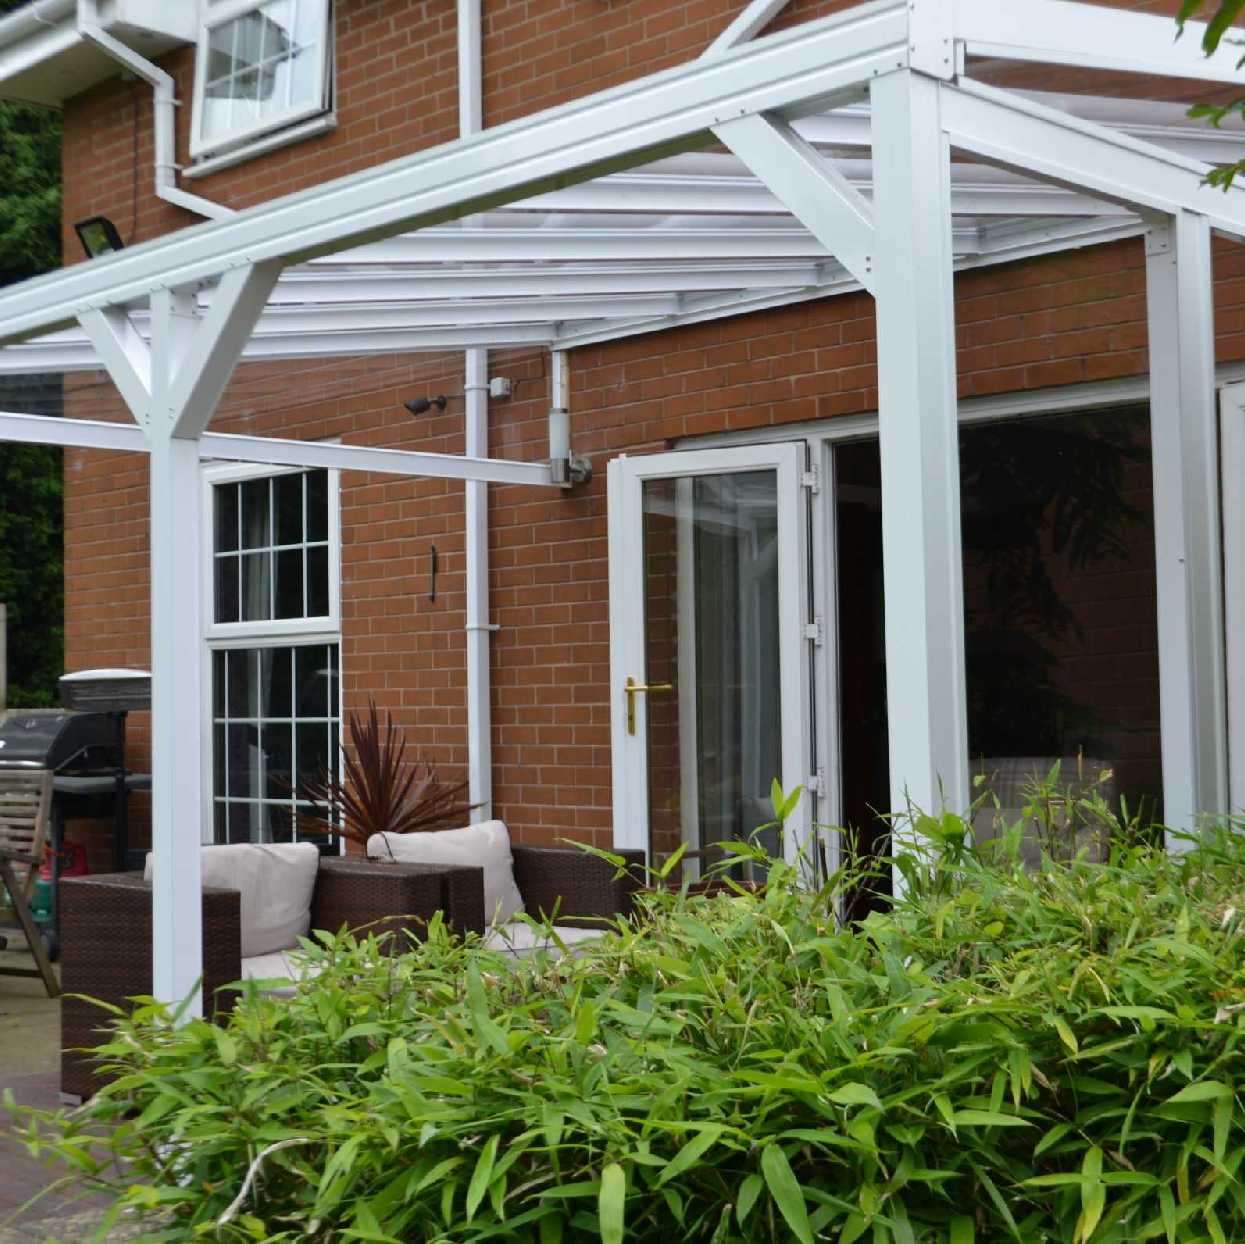 Omega Smart Lean-To Canopy, White with 6mm Glass Clear Plate Polycarbonate Glazing - 7.4m (W) x 4.0m (P), (4) Supporting Posts from Omega Build